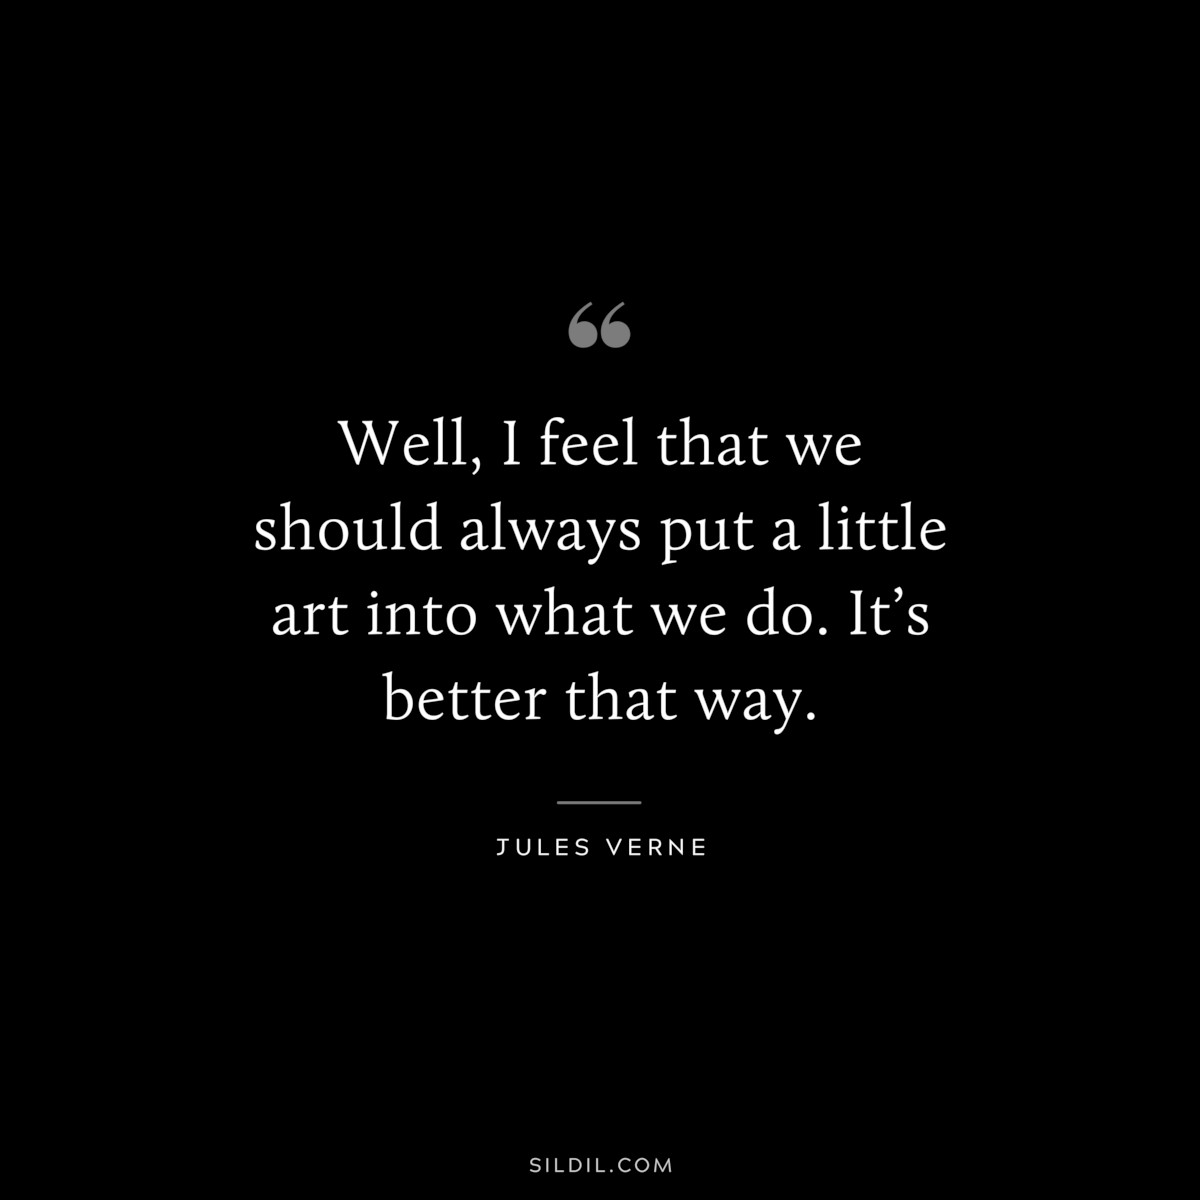 Well, I feel that we should always put a little art into what we do. It’s better that way.